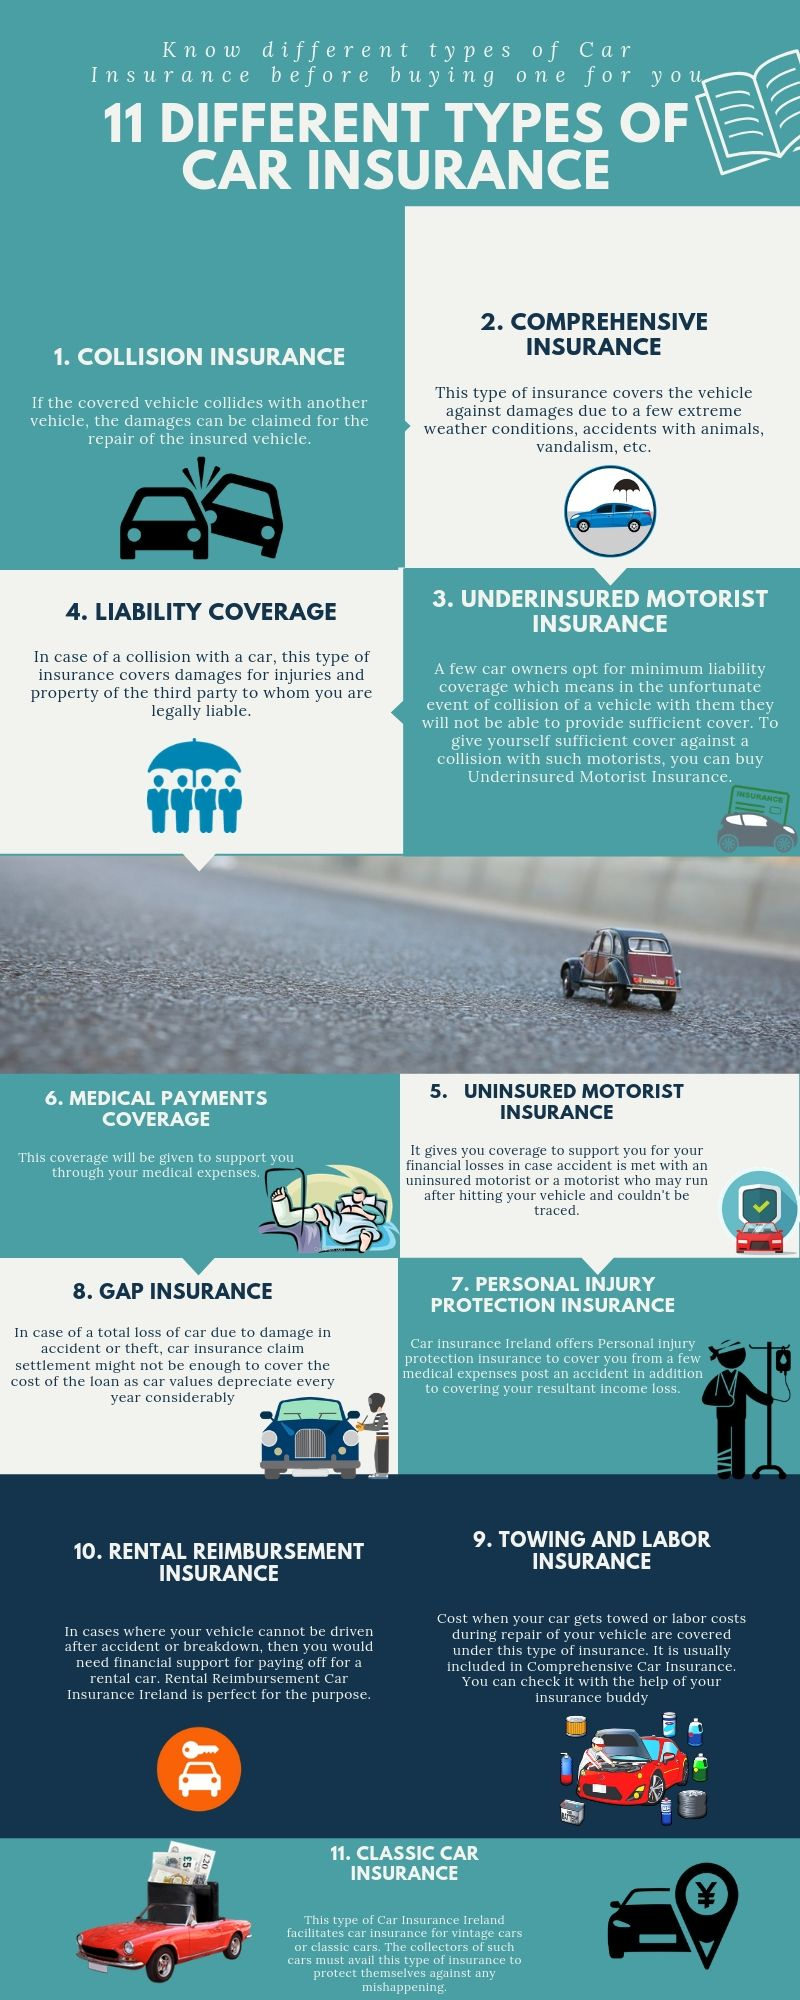 Car Insurance Is Mandated For Every Car Owner In Ireland throughout dimensions 800 X 2000